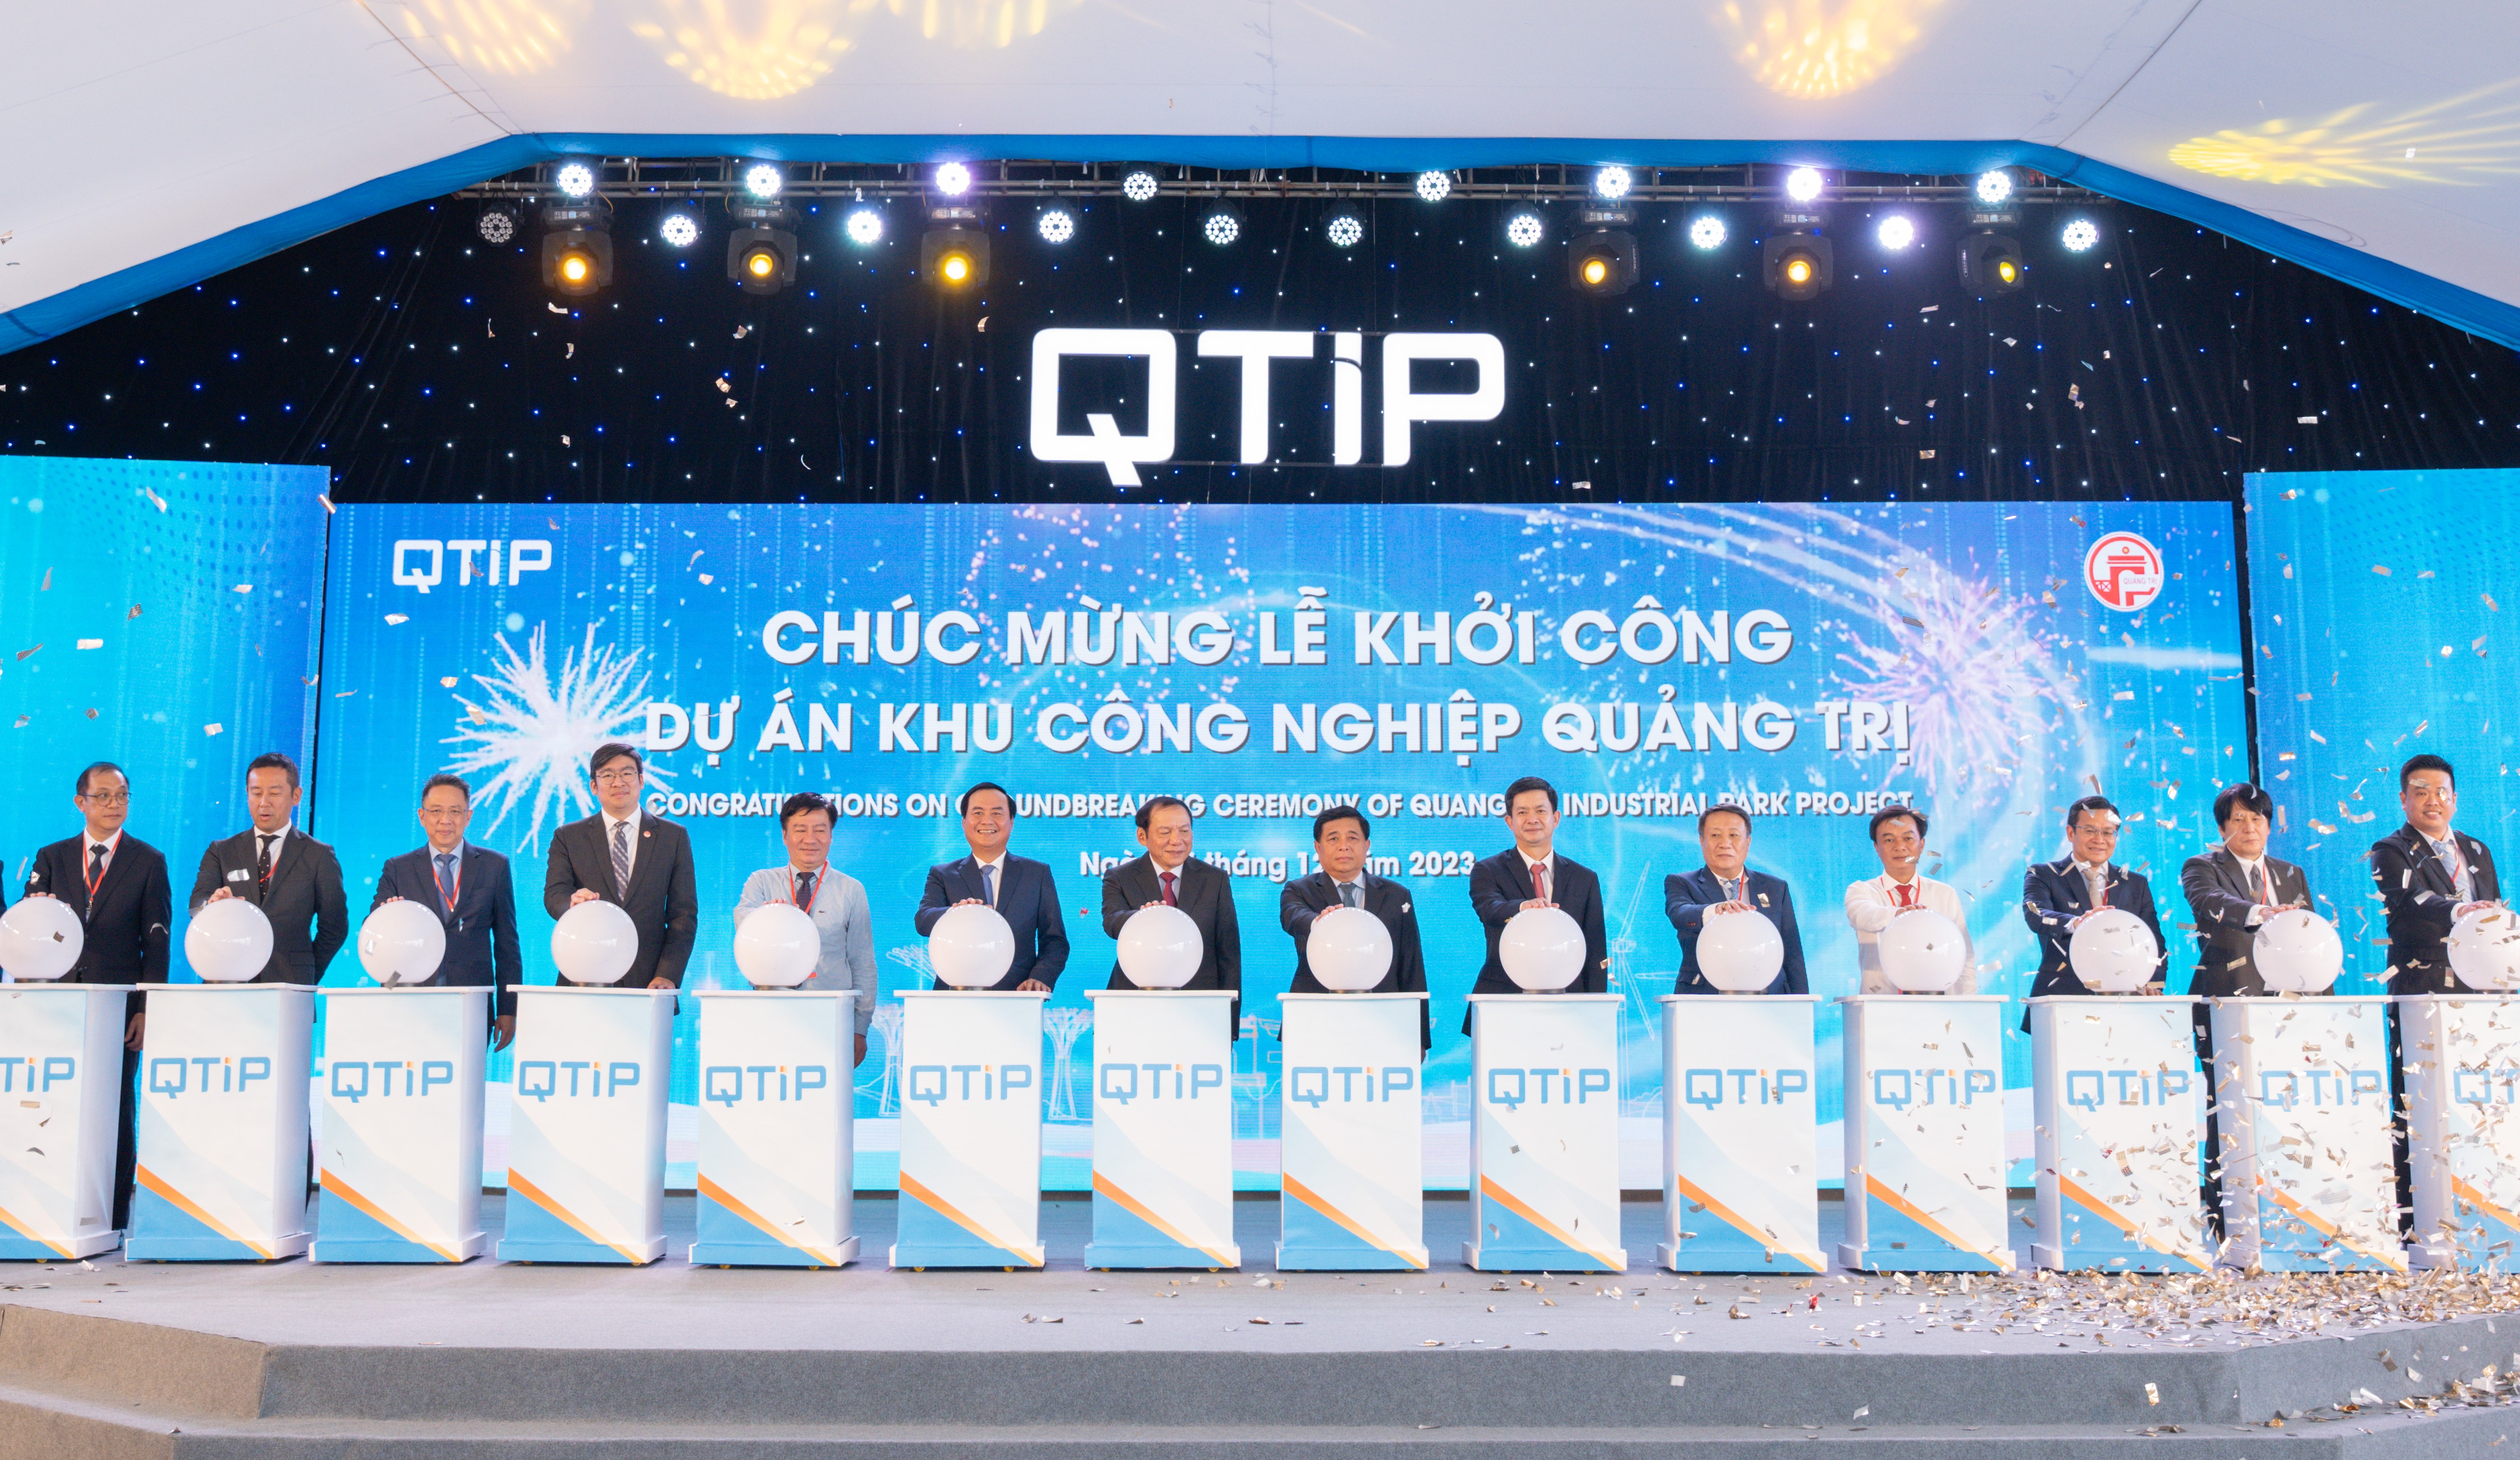 GROUNDBREAKING CEREMONY FOR QUANG TRI INDUSTRIAL PARK IN CENTRAL VIETNAM